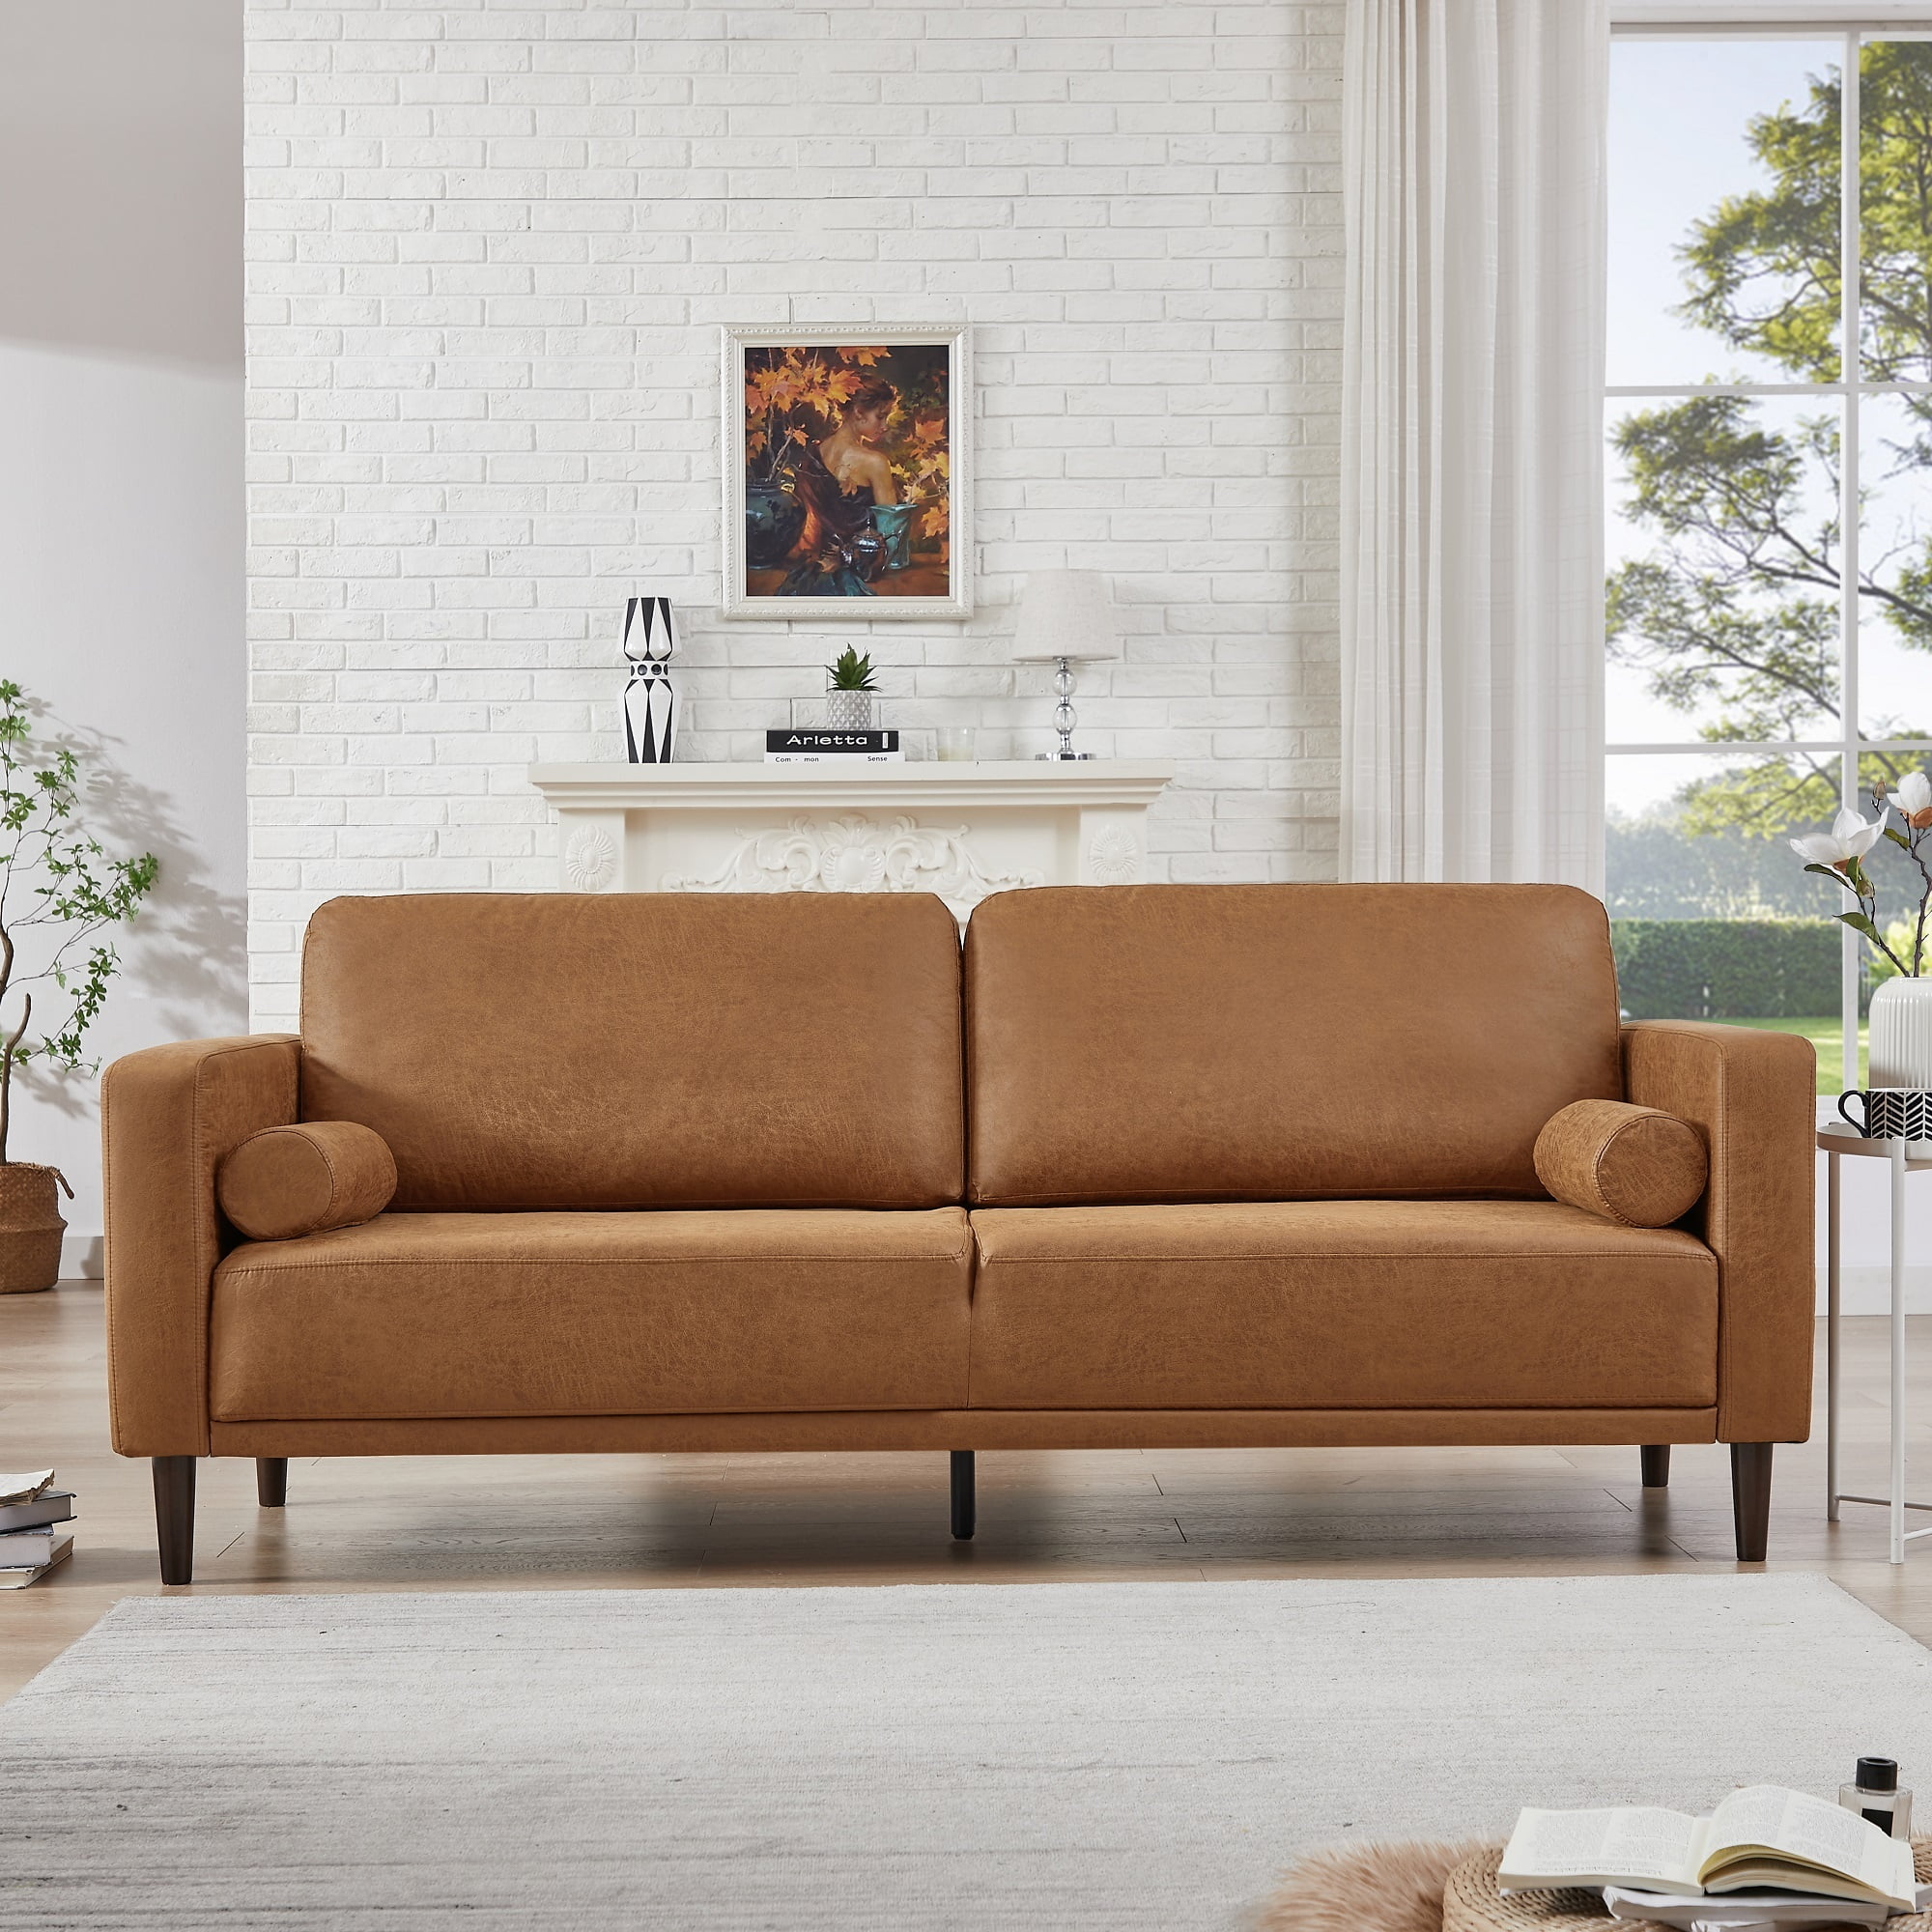 Homfa 3 Seat Sofa, 78.9\'\' Couch Large Upholstered Square Arm, Modern with PU Camel